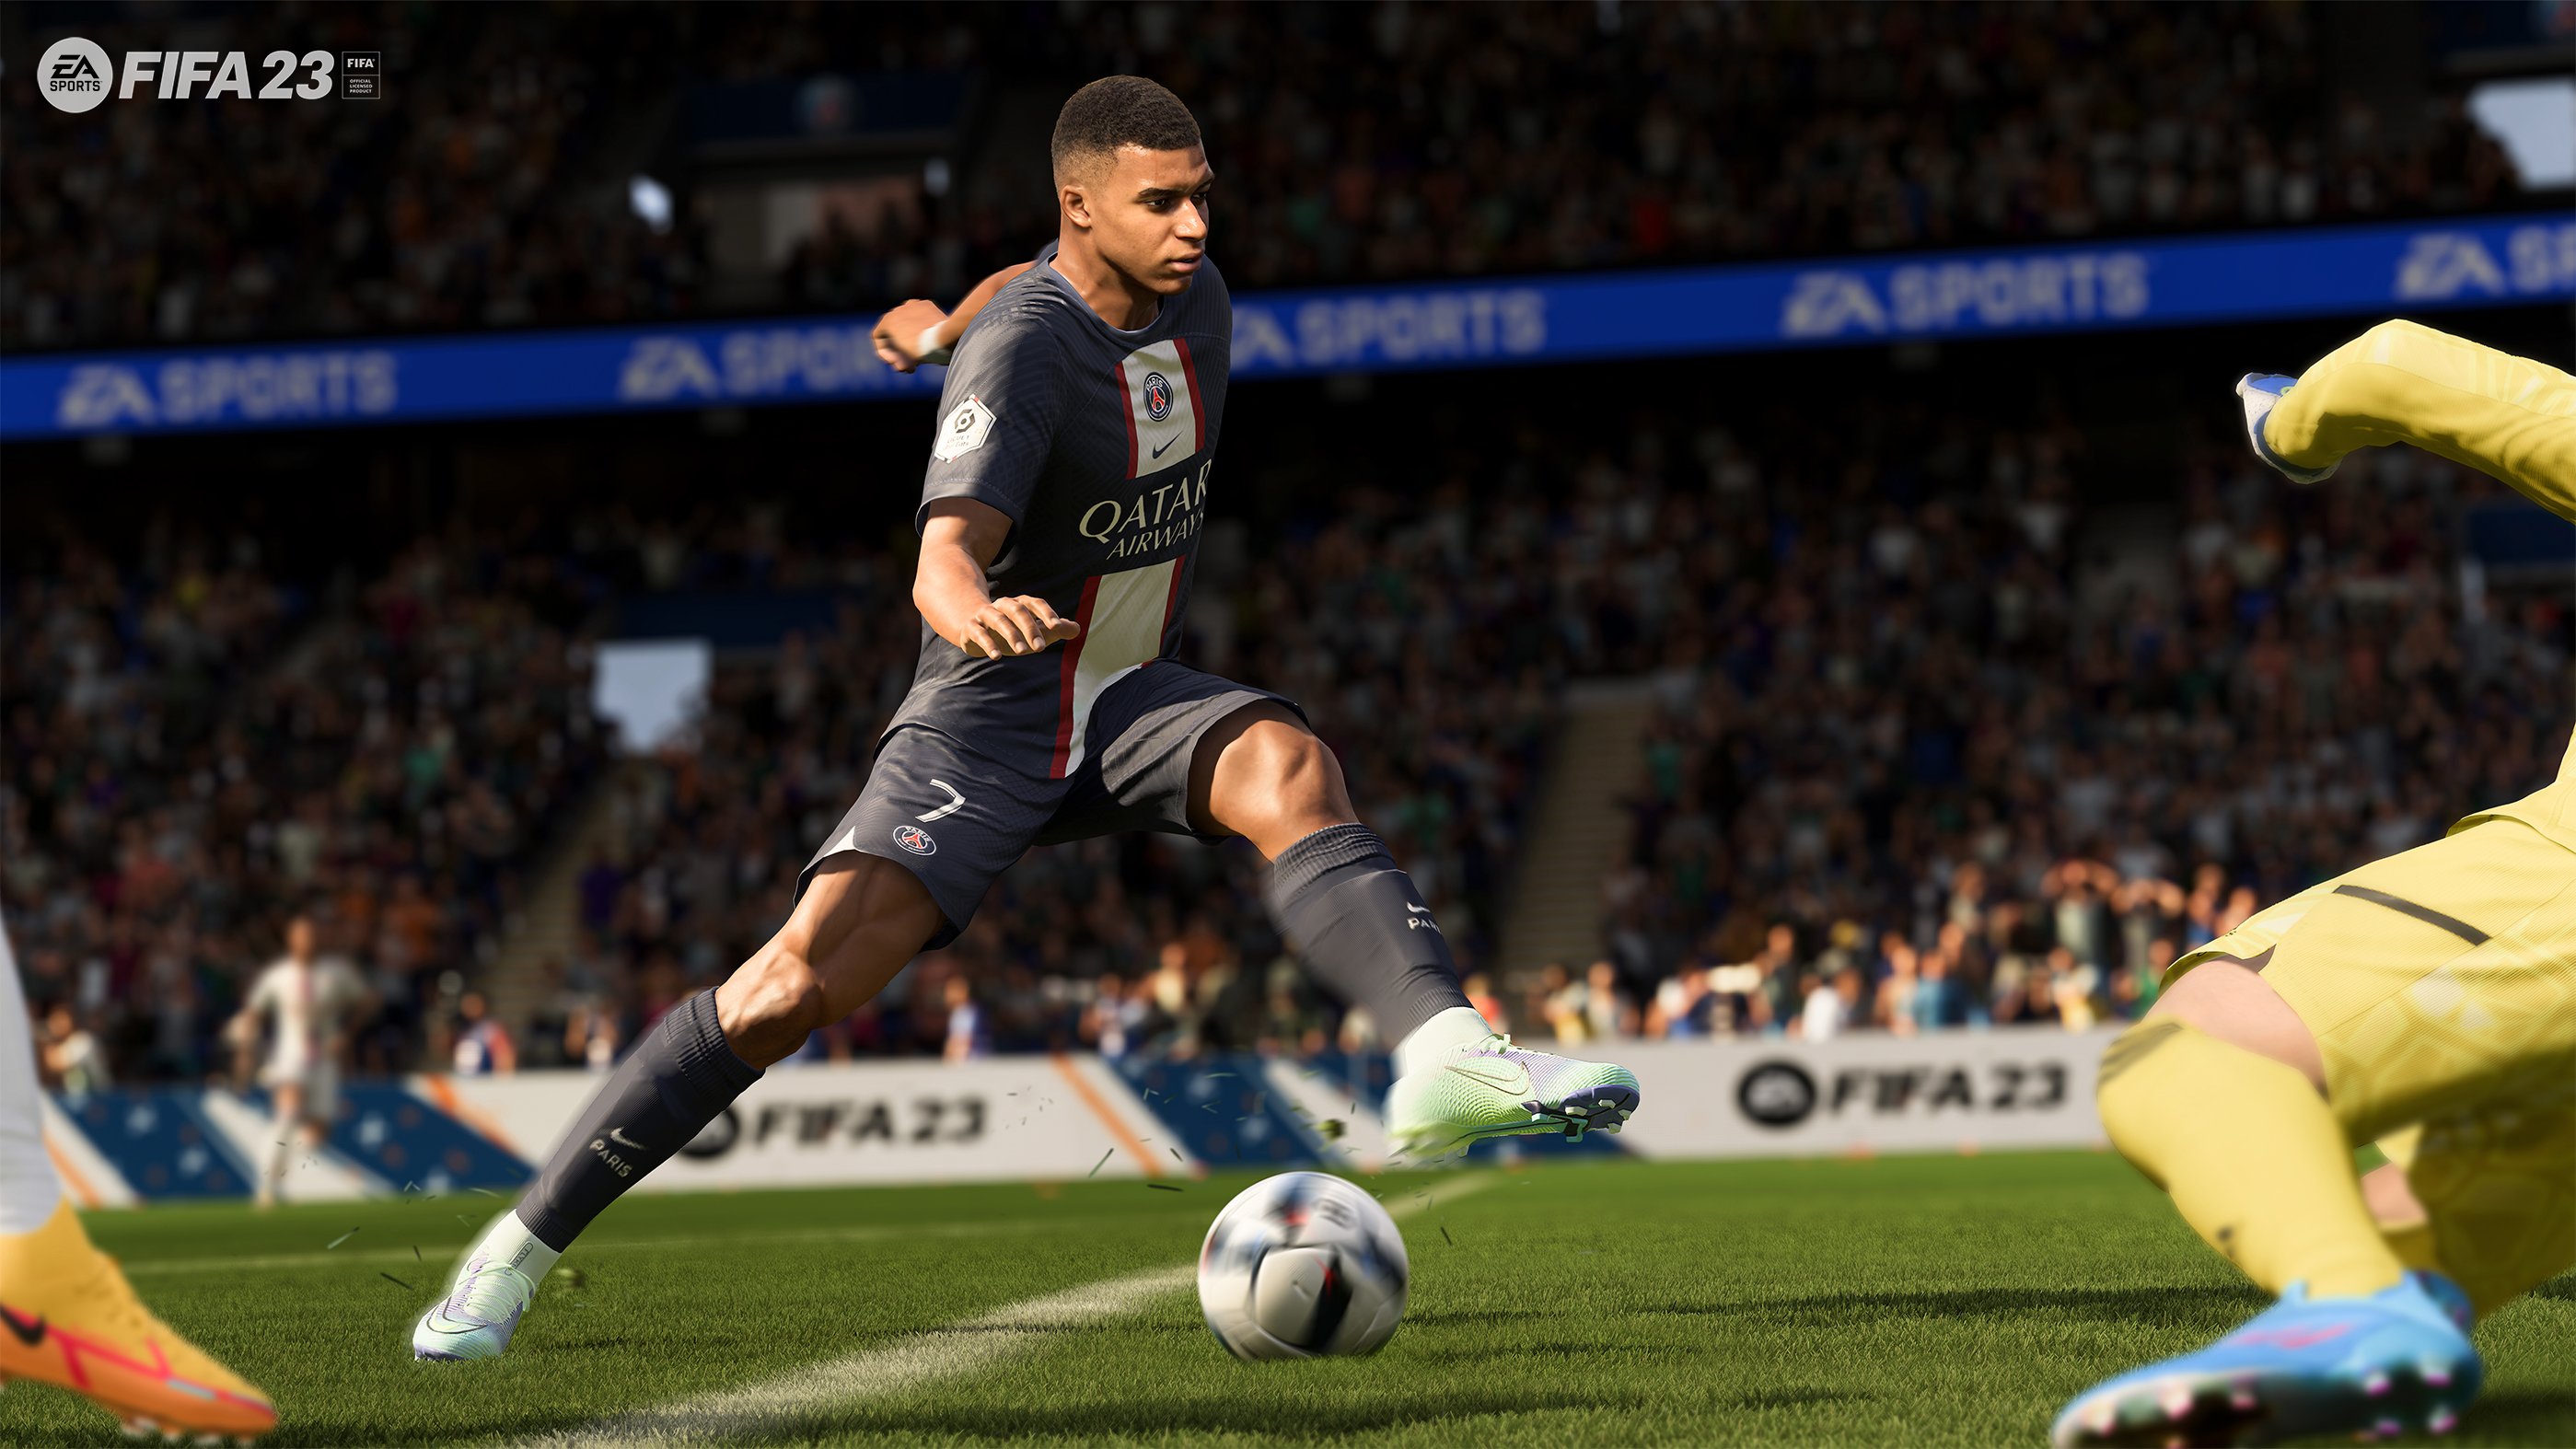 FIFA 23 Ultimate Edition release date: Early access, EA Play 10